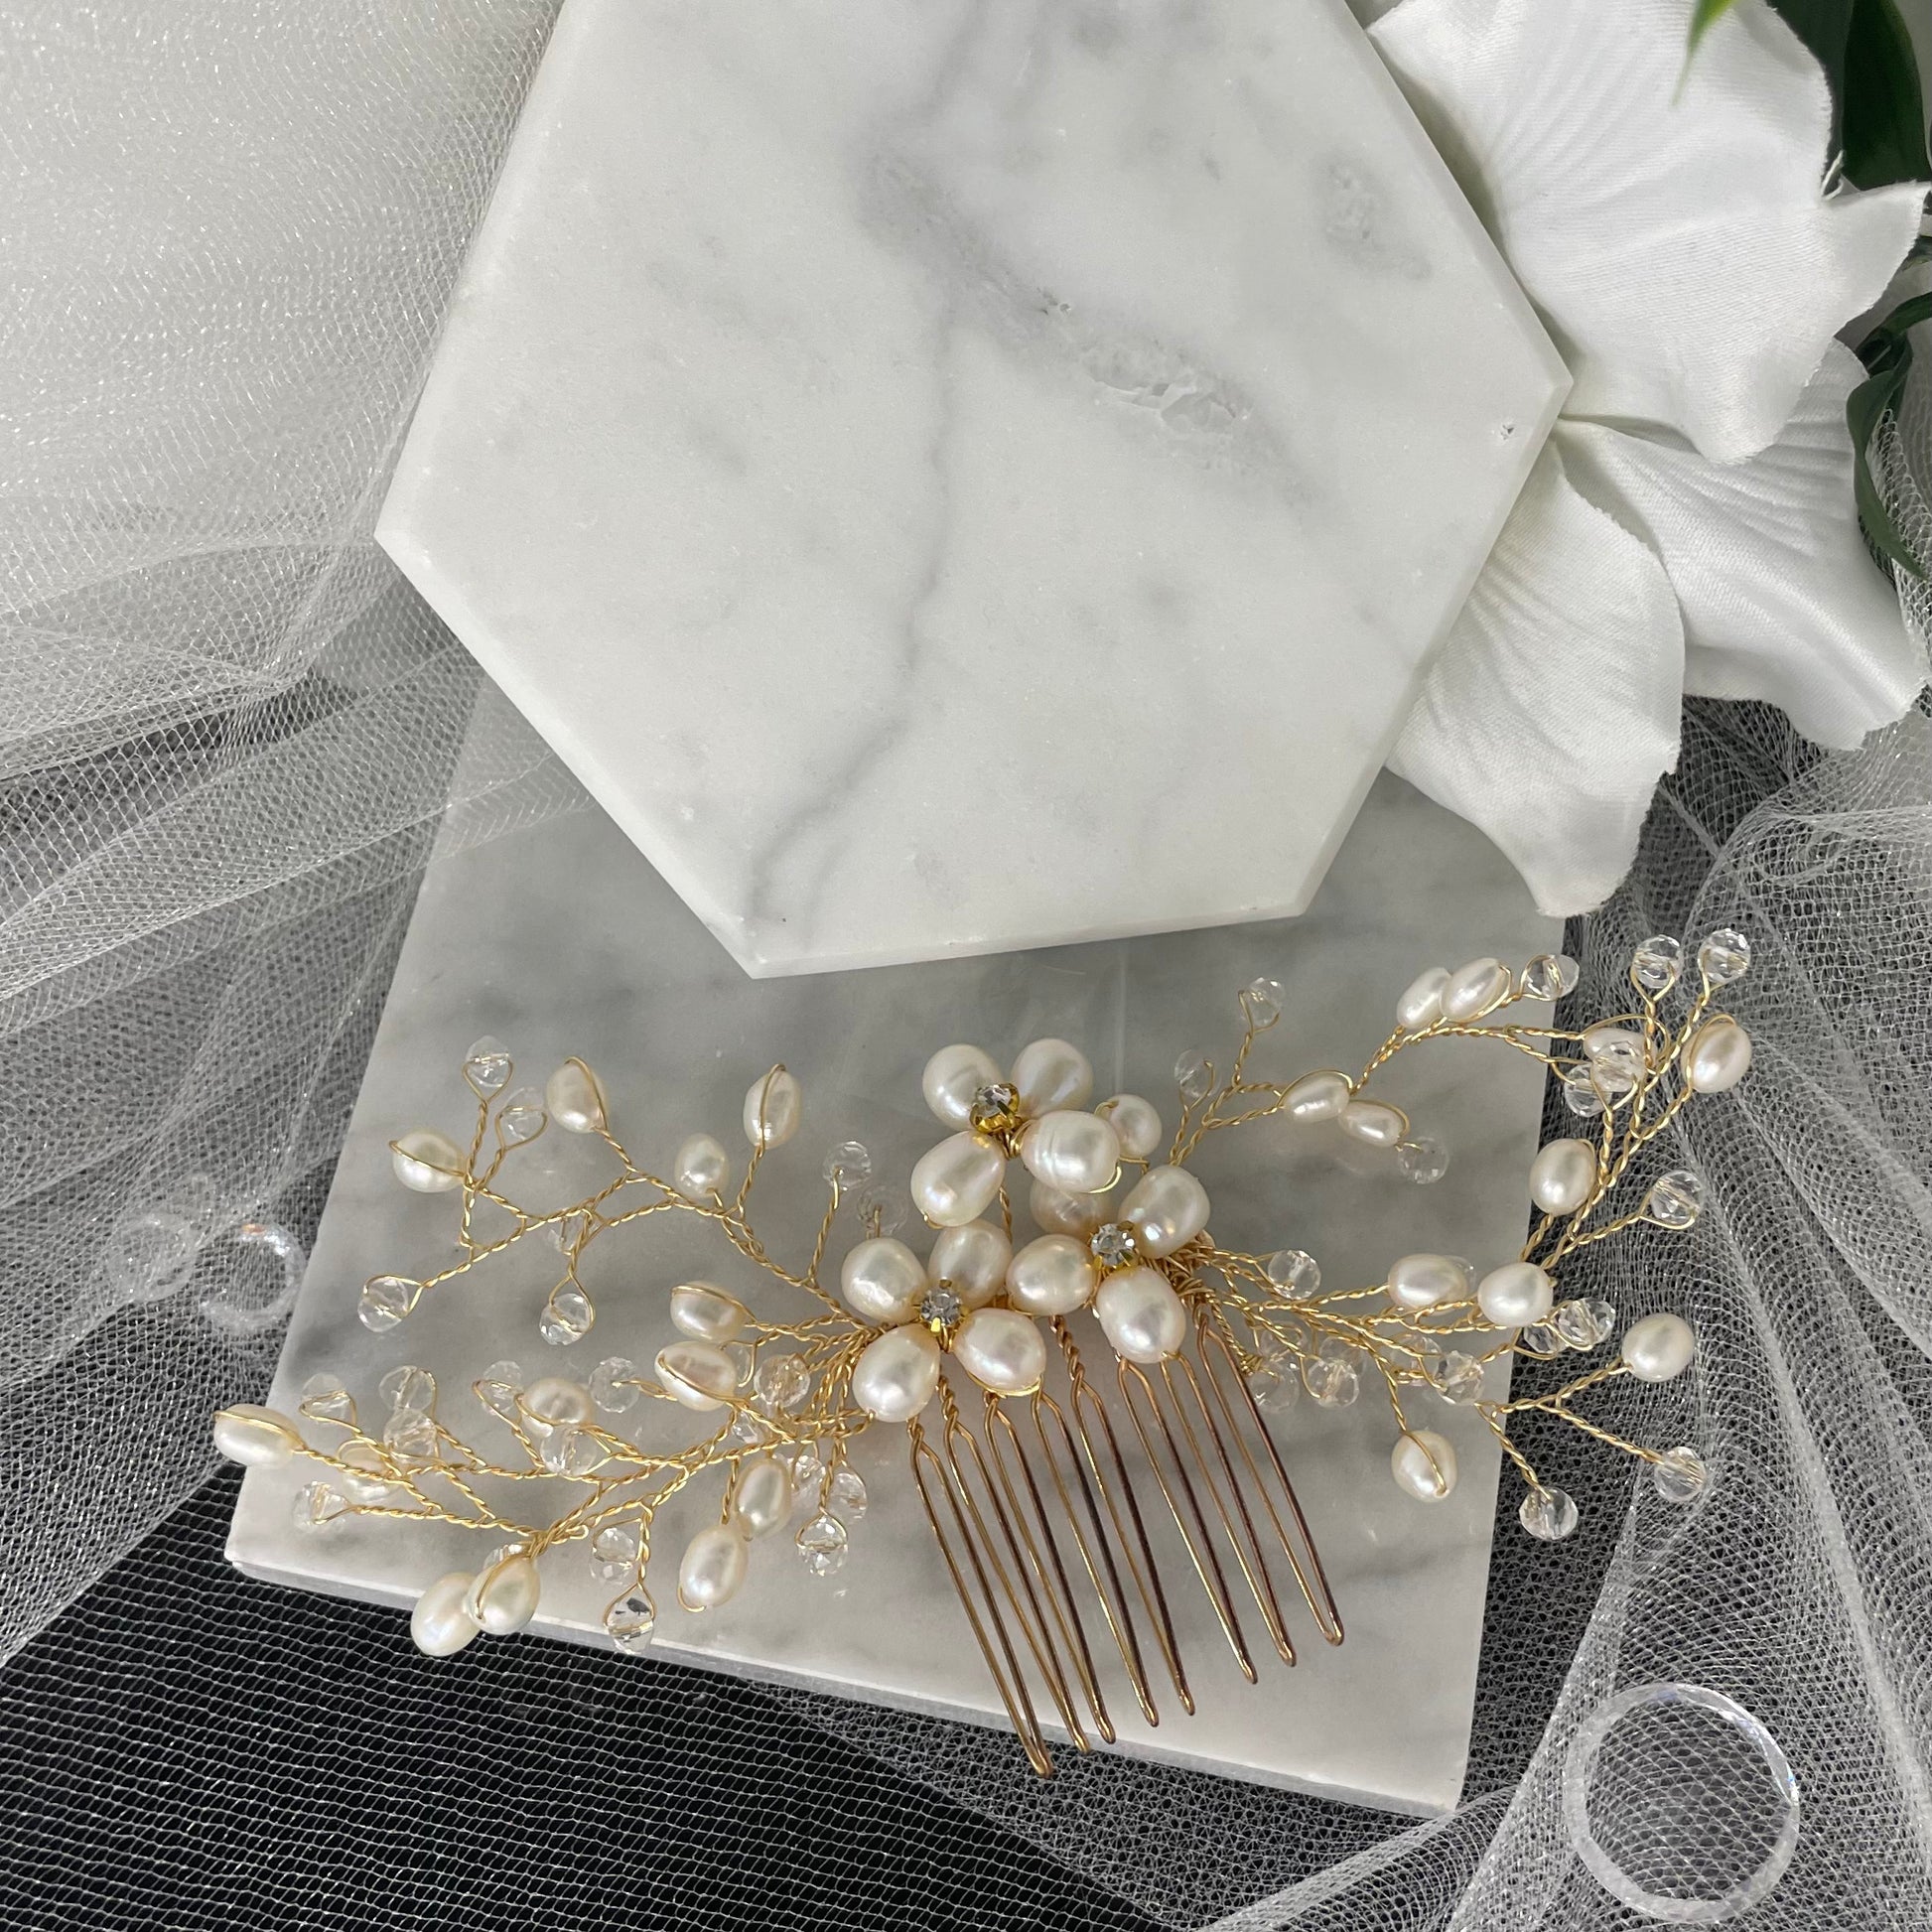 Adalynn pearl and Crystal Wedding comb in gold wire